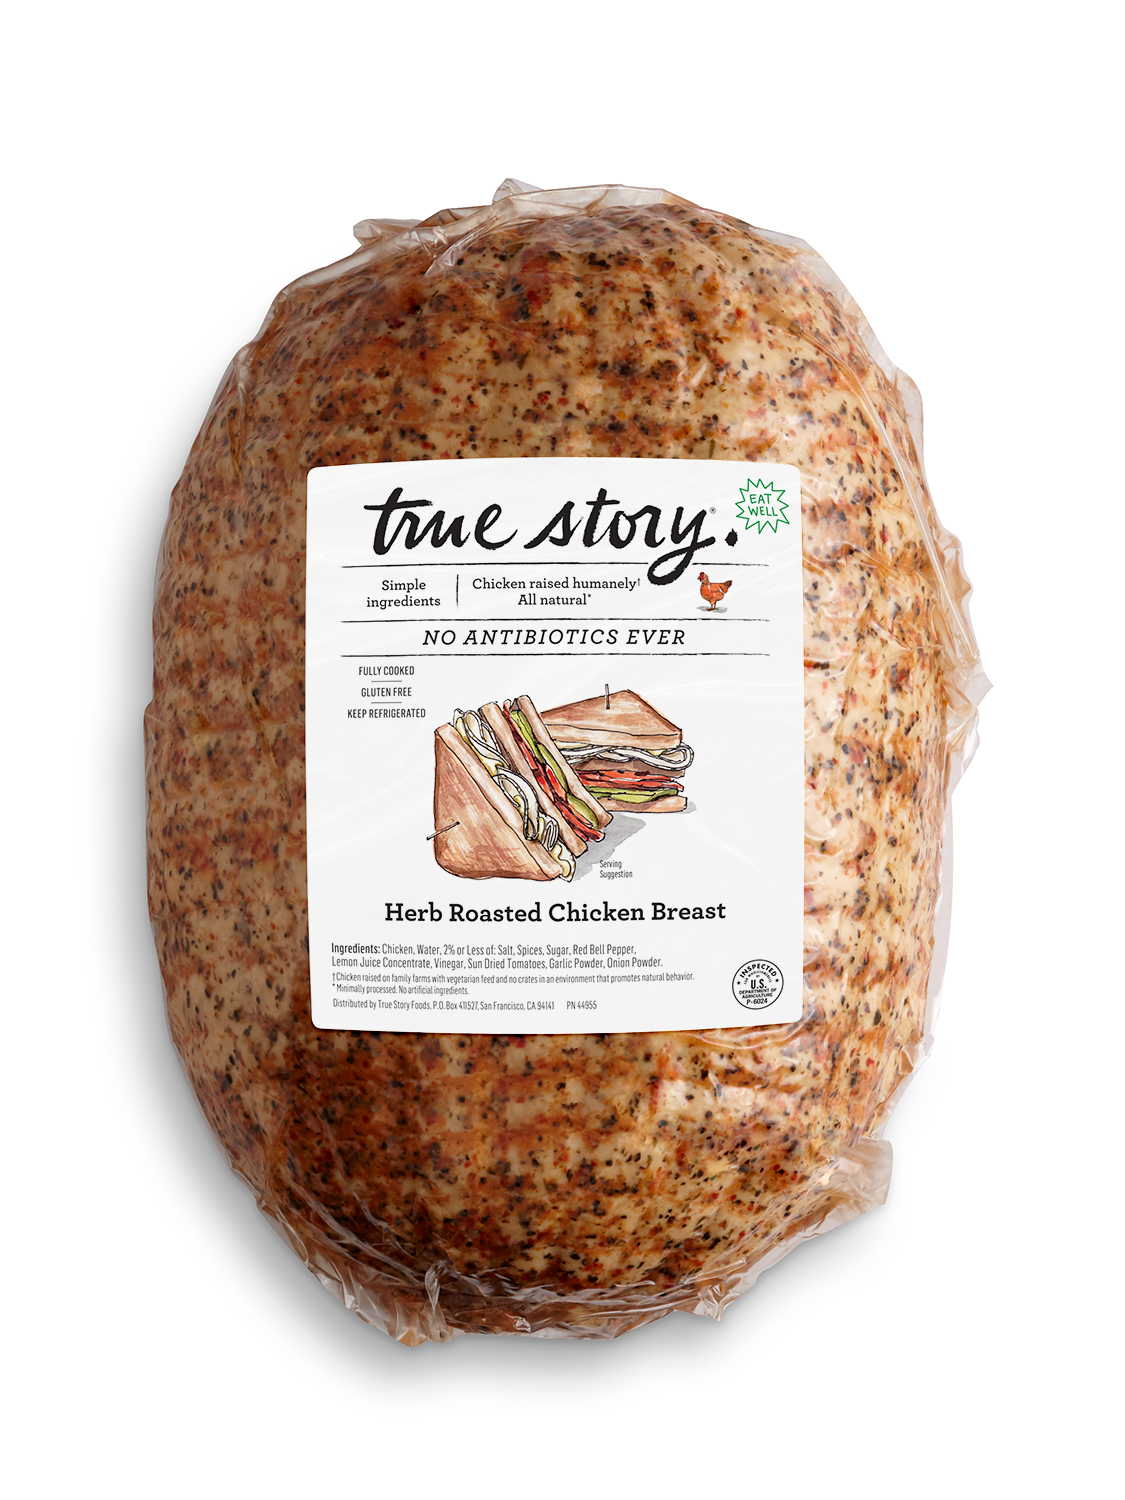 Herb Roasted Chicken Breast Product Packaging